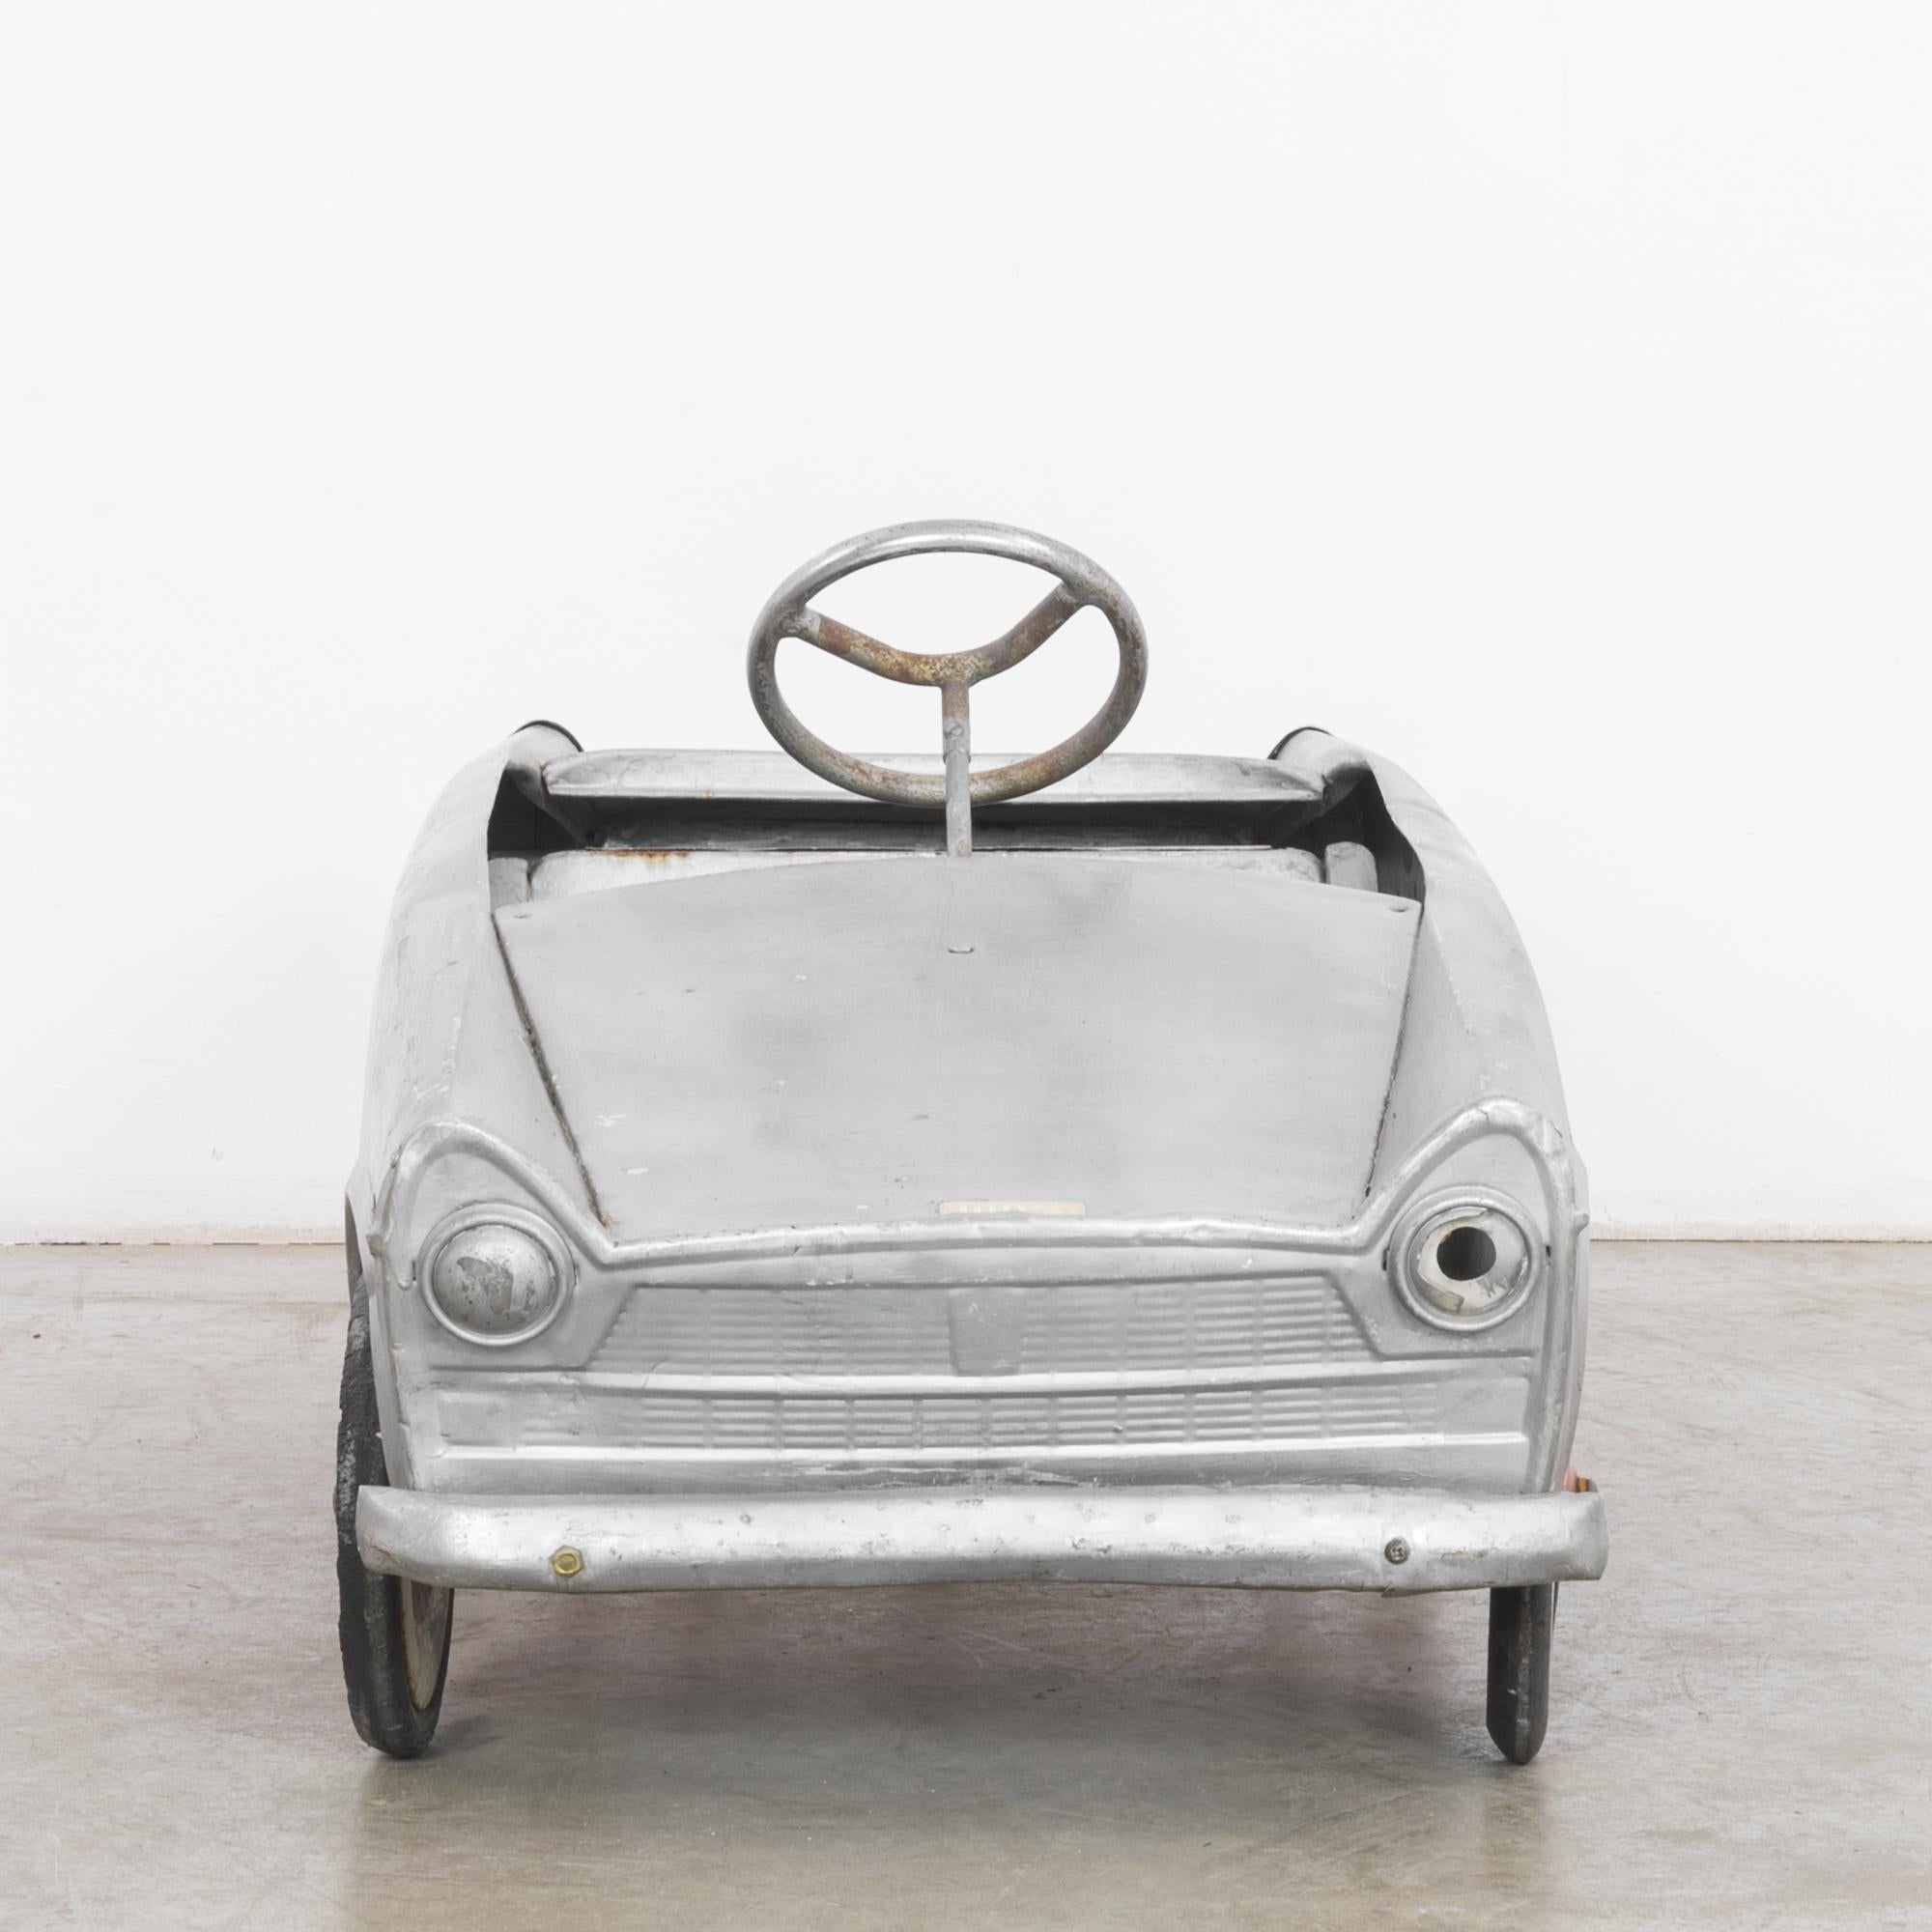 A metal pedal car from the 1960s. This sophisticated toy has the long, low, flat shape of a vintage car; a raised steering wheel and the back license plate add to this charming impression. The body of the car is painted a matte silver-gray, while